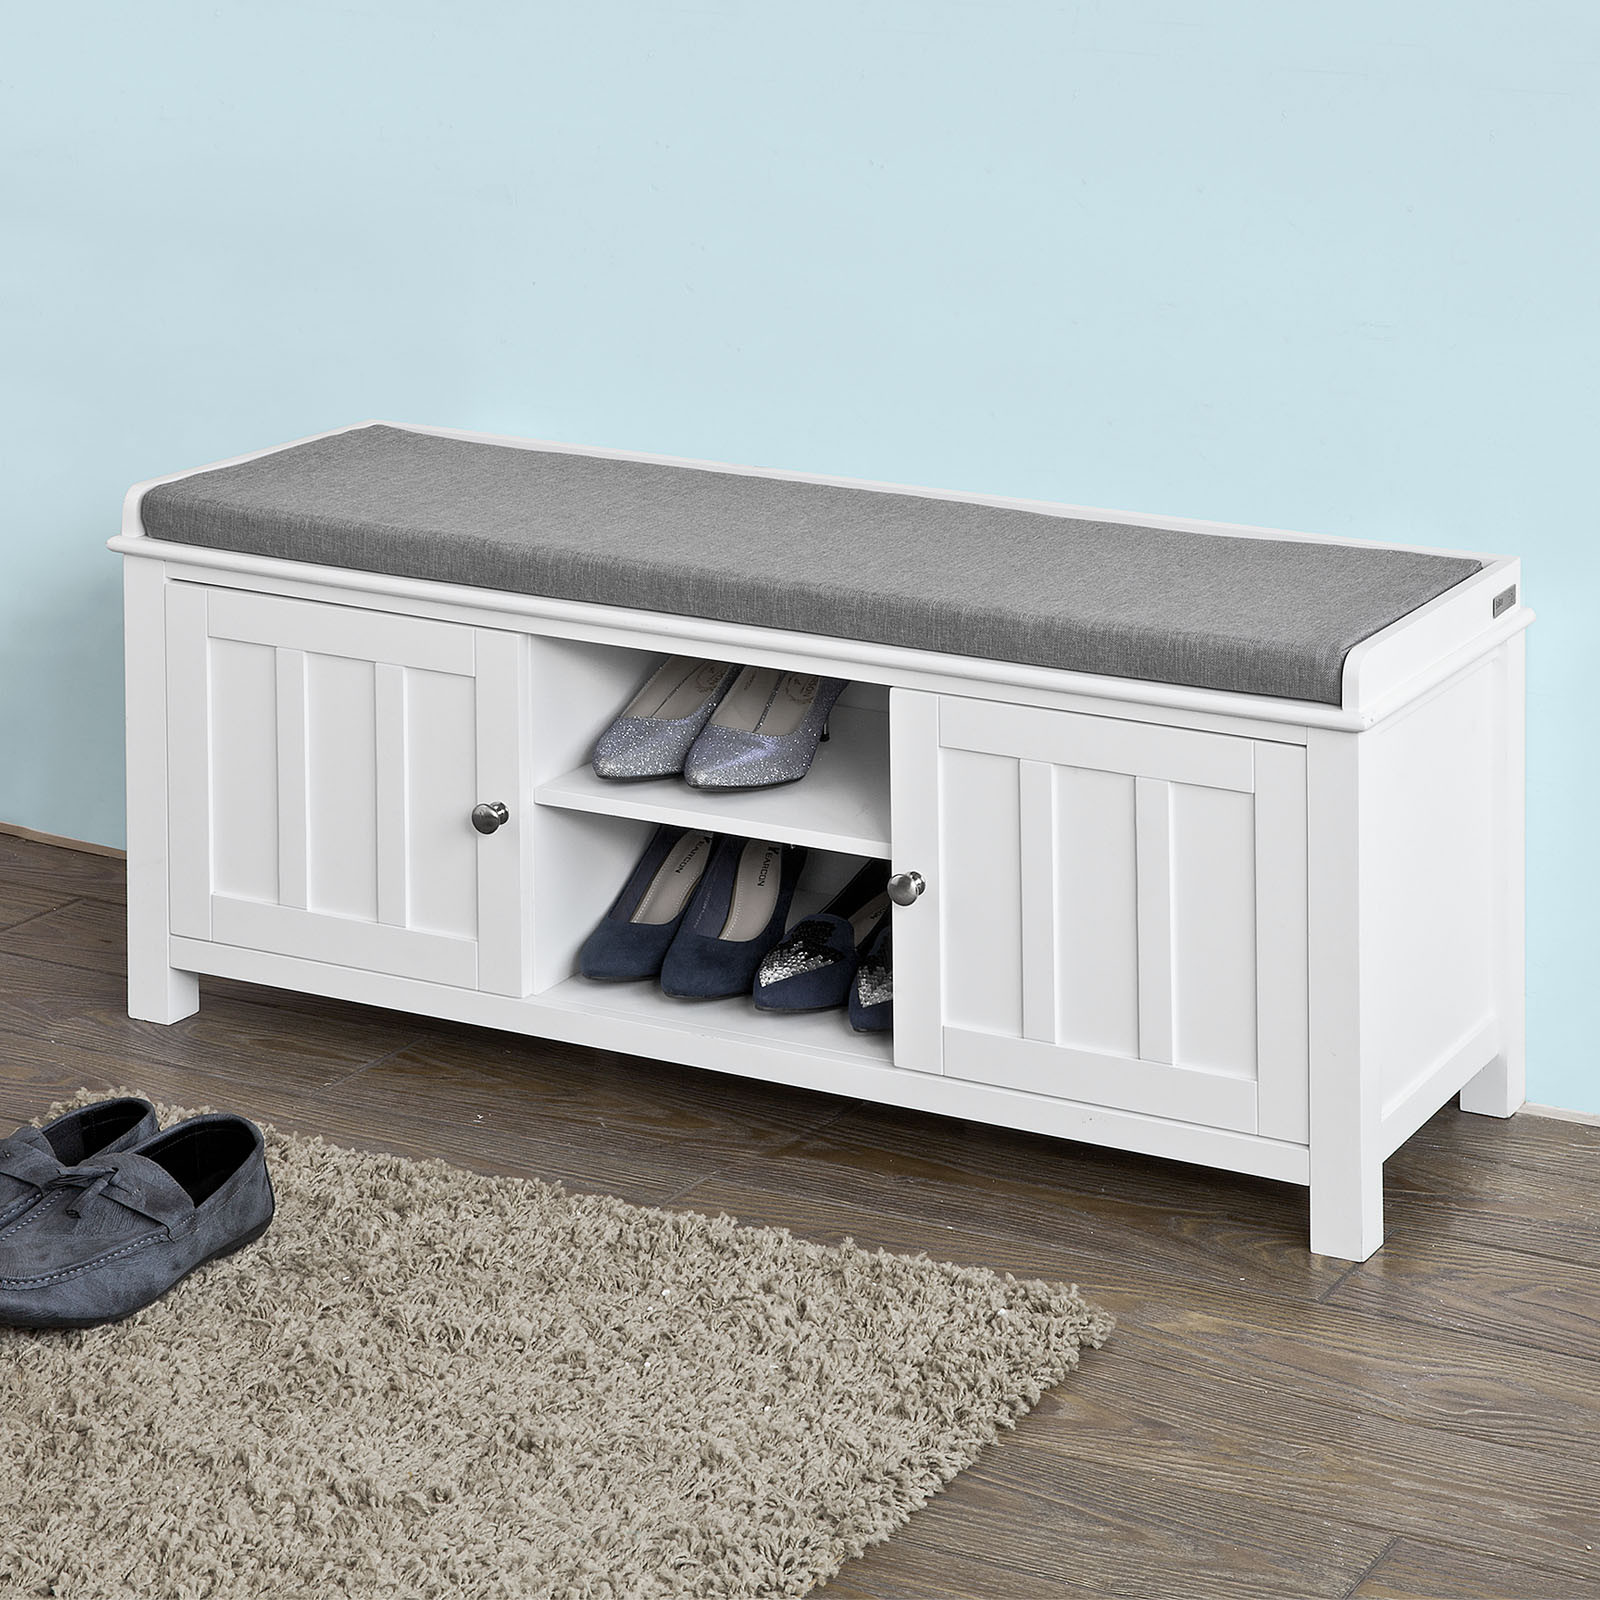 Storage Bench With Doors
 Haotian White Storage Bench with 2 Doors & Removable Seat